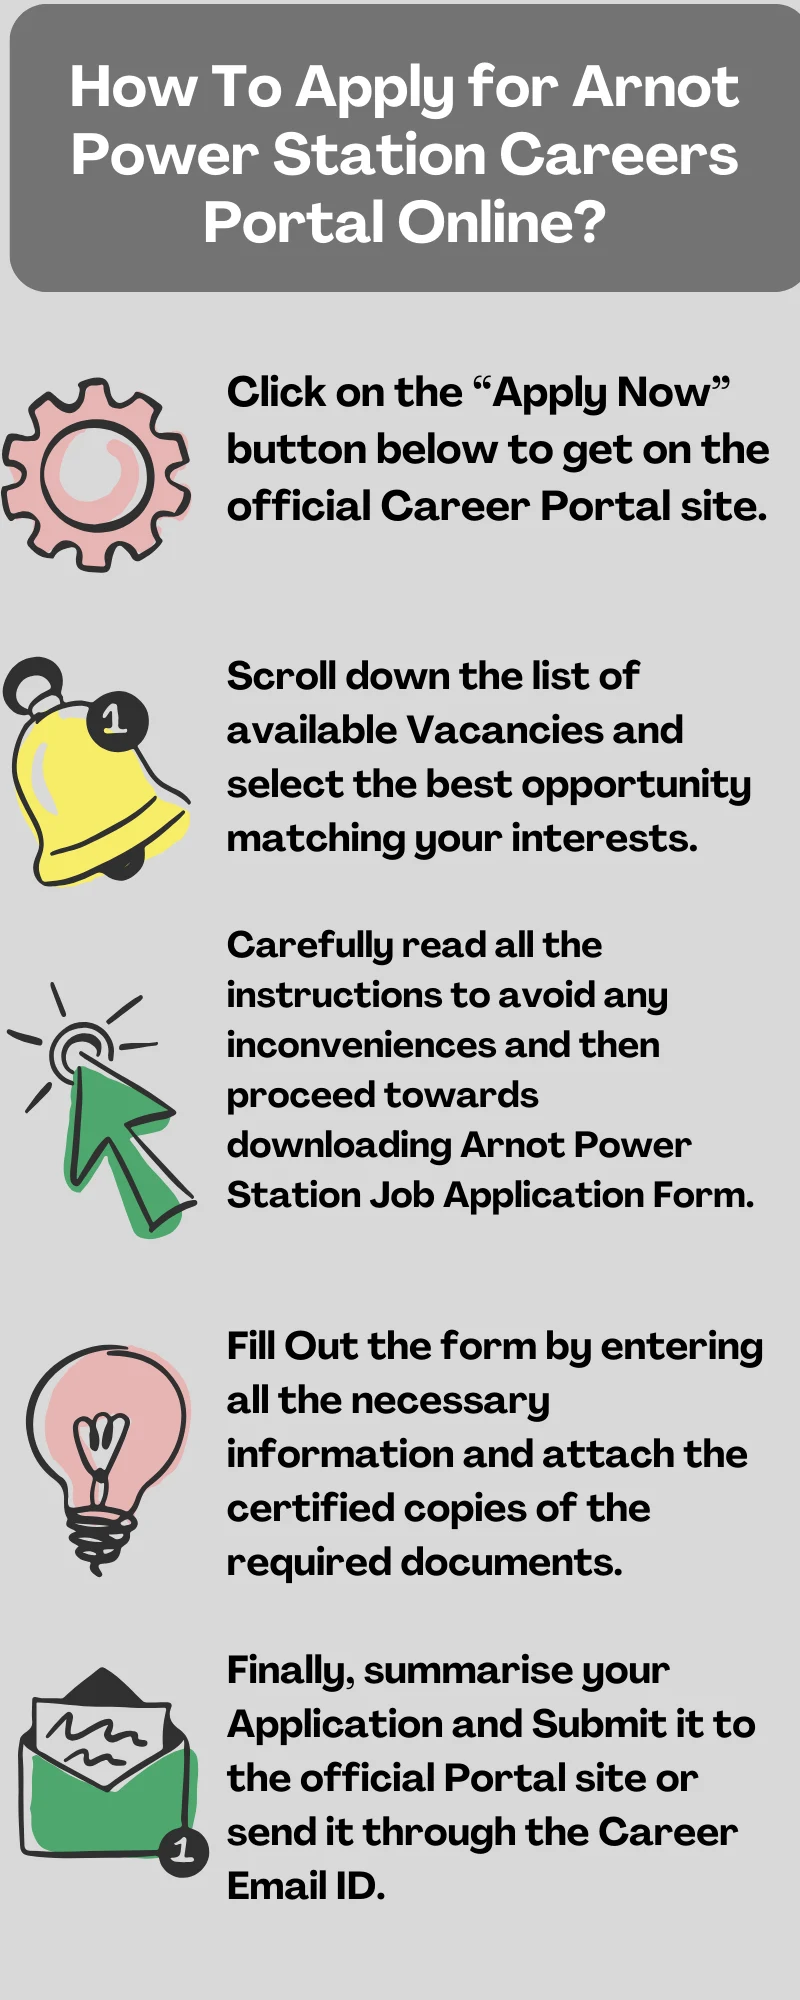 How To Apply for Arnot Power Station Careers Portal Online?